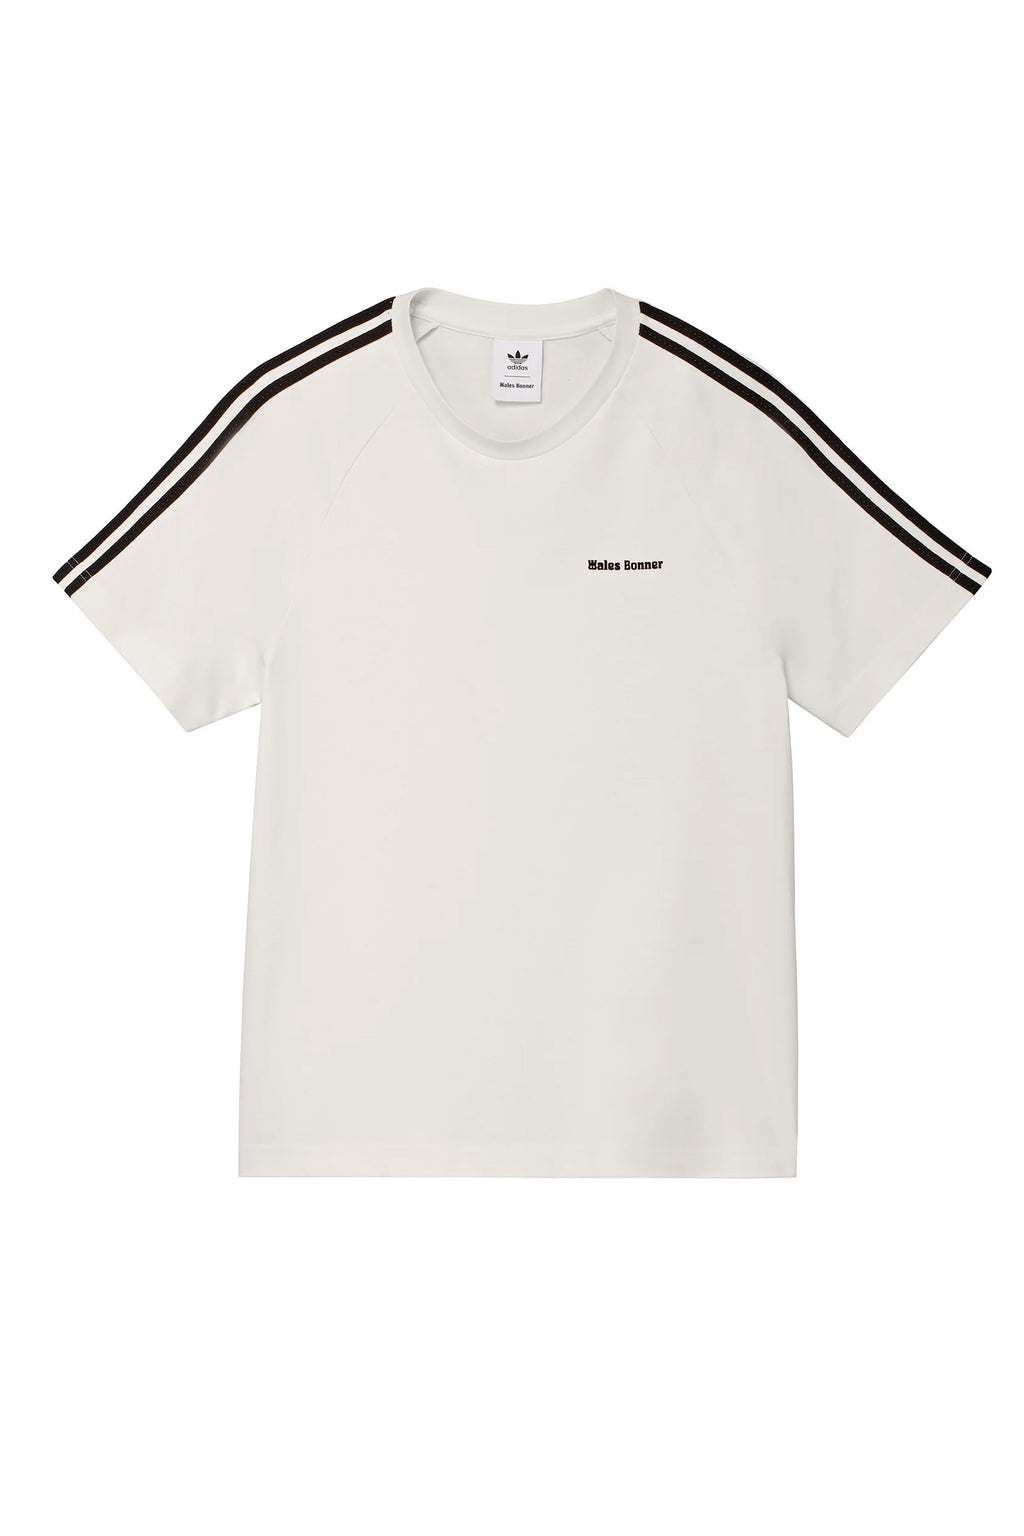 WALES BONNER WHT / TEE S/S ORIGINALS ADIDAS NUBIAN WB - FW23 BY